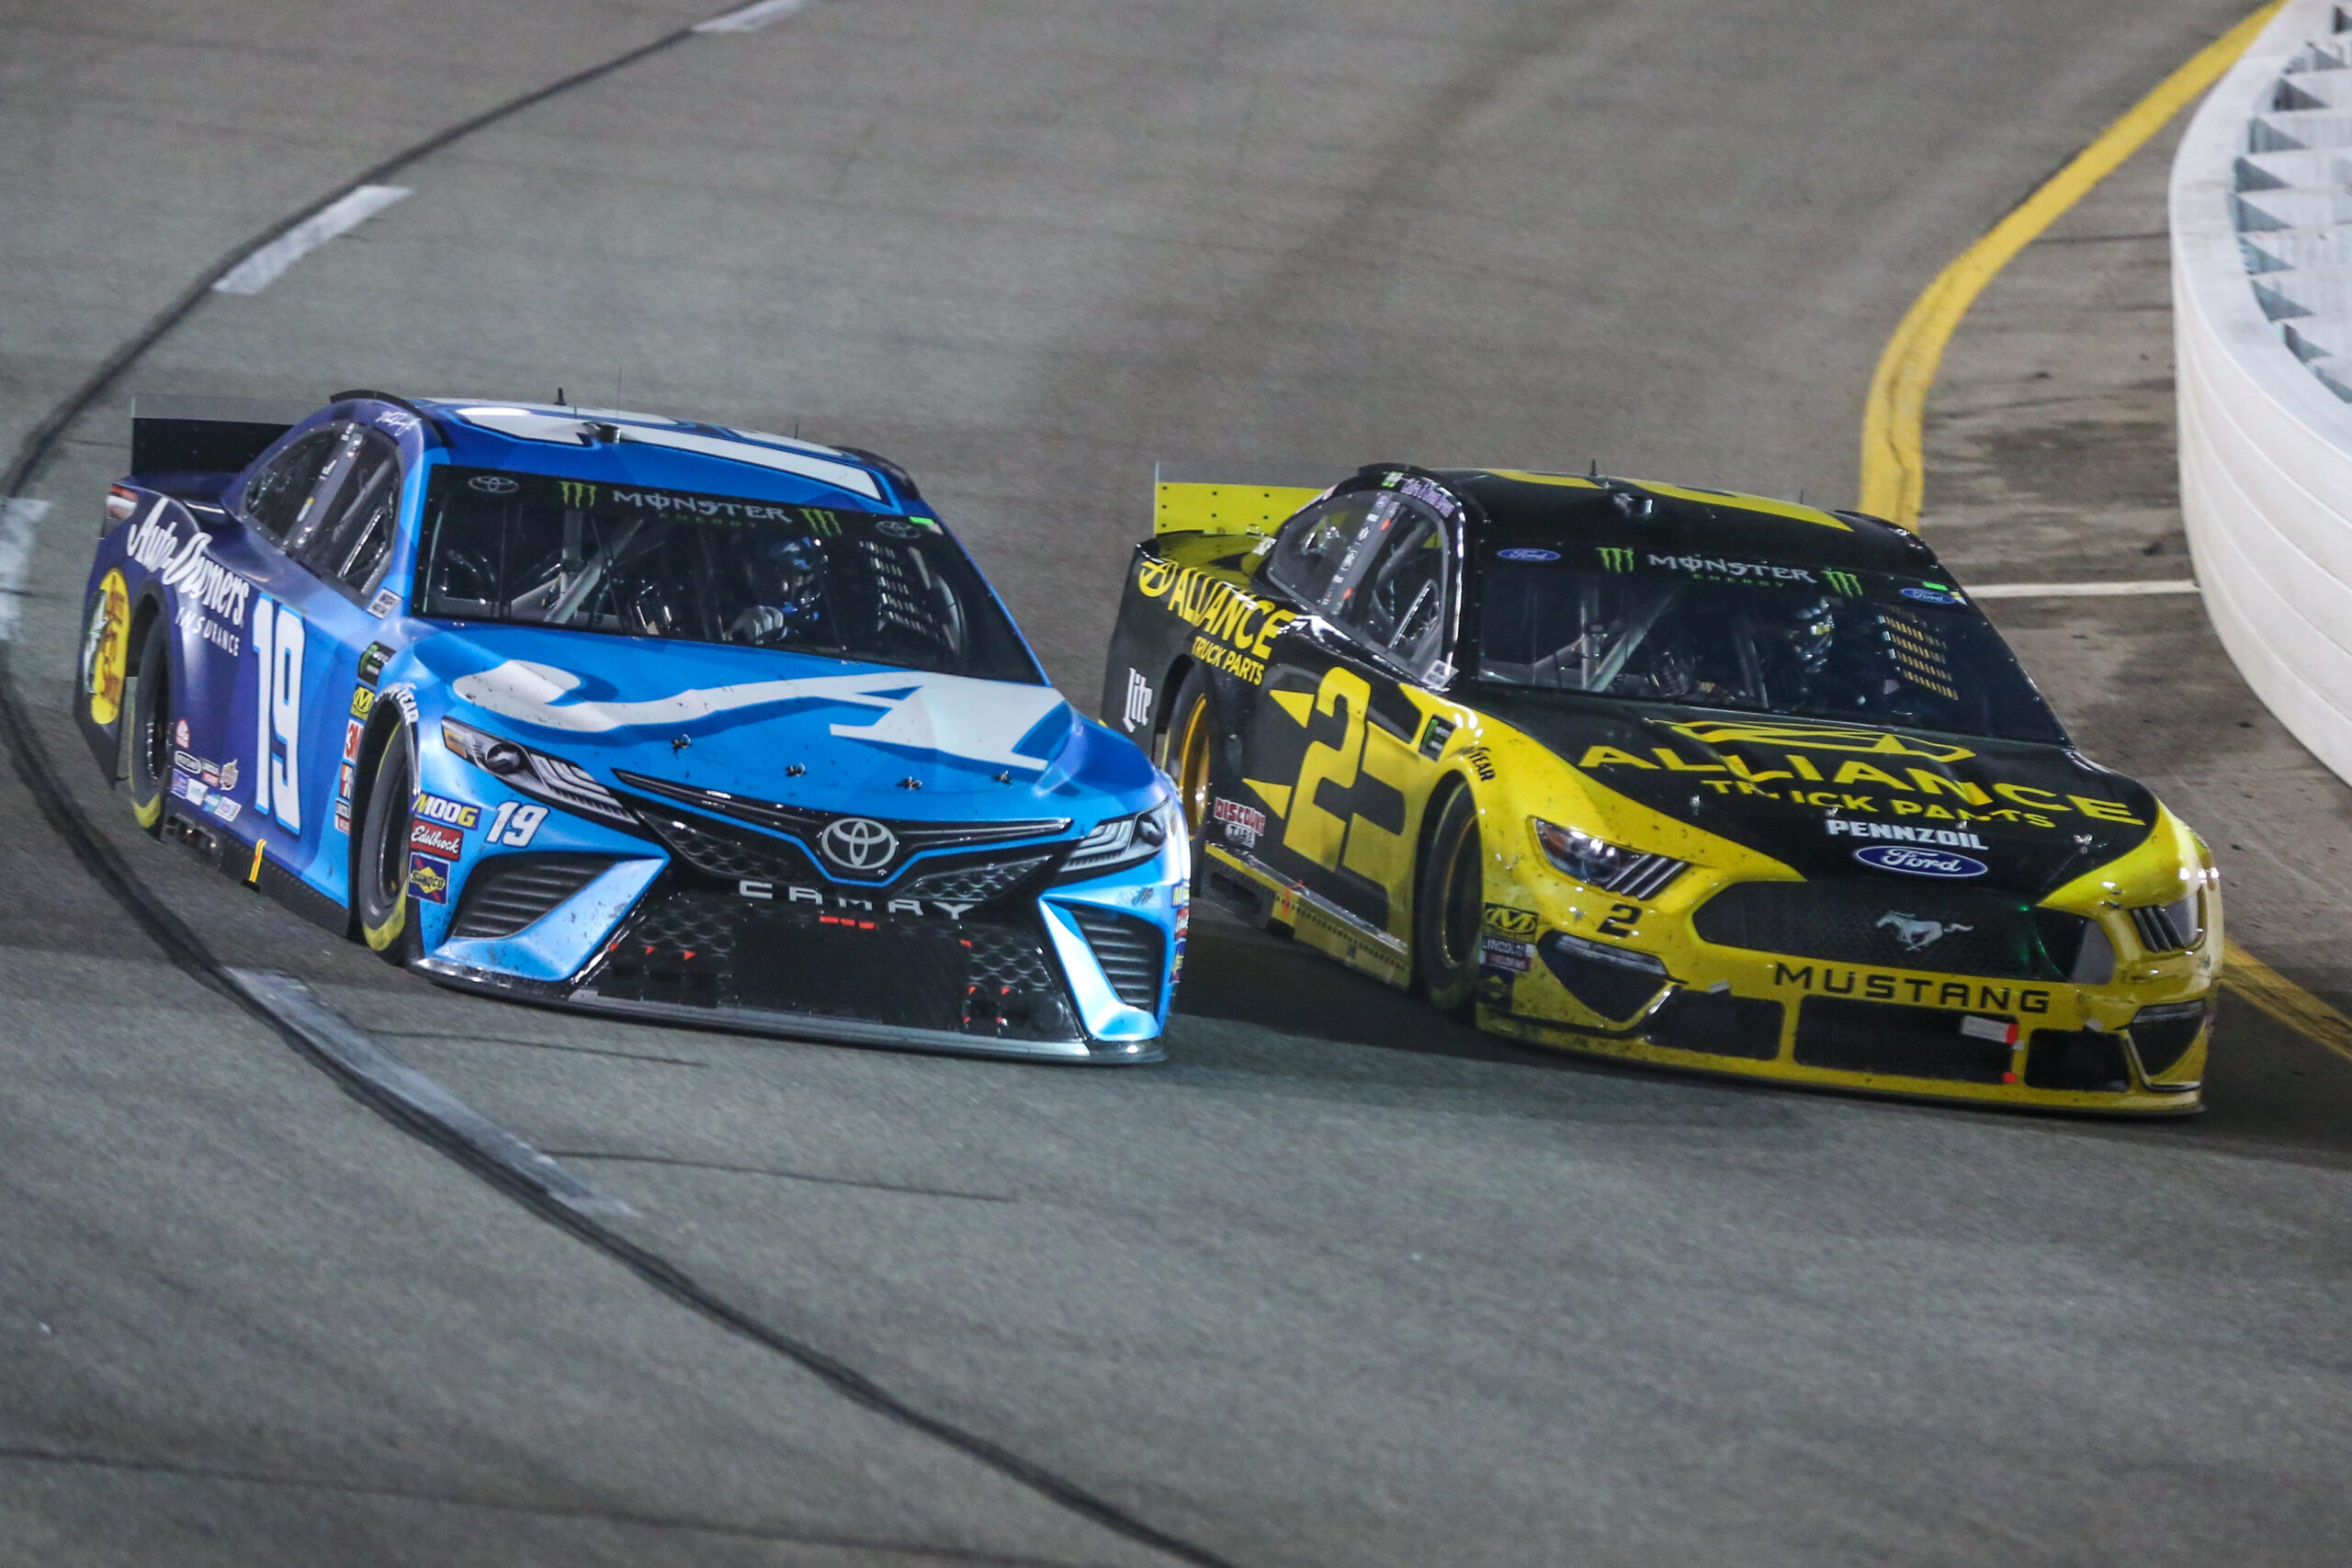 Might we see wheel-to-wheel action between Truex and Keselowski in today's Toyota Owners 400 at Richmond? (Photo: Jonathan Huff)